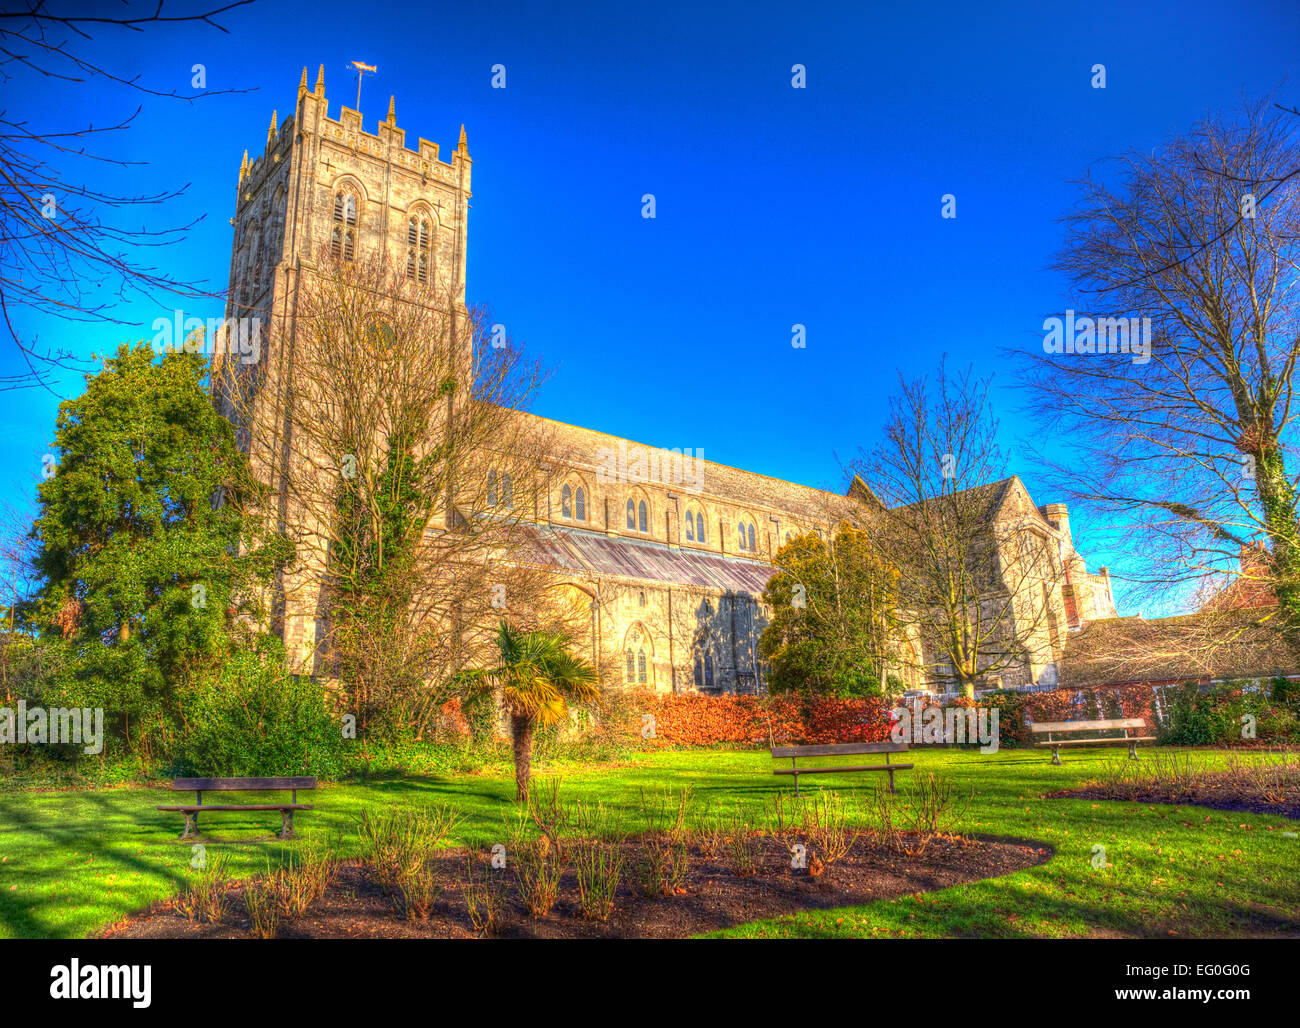 Christchurch Priory Dorset England UK 11th century Grade I listed church in town centre in colourful vivid HDR Stock Photo